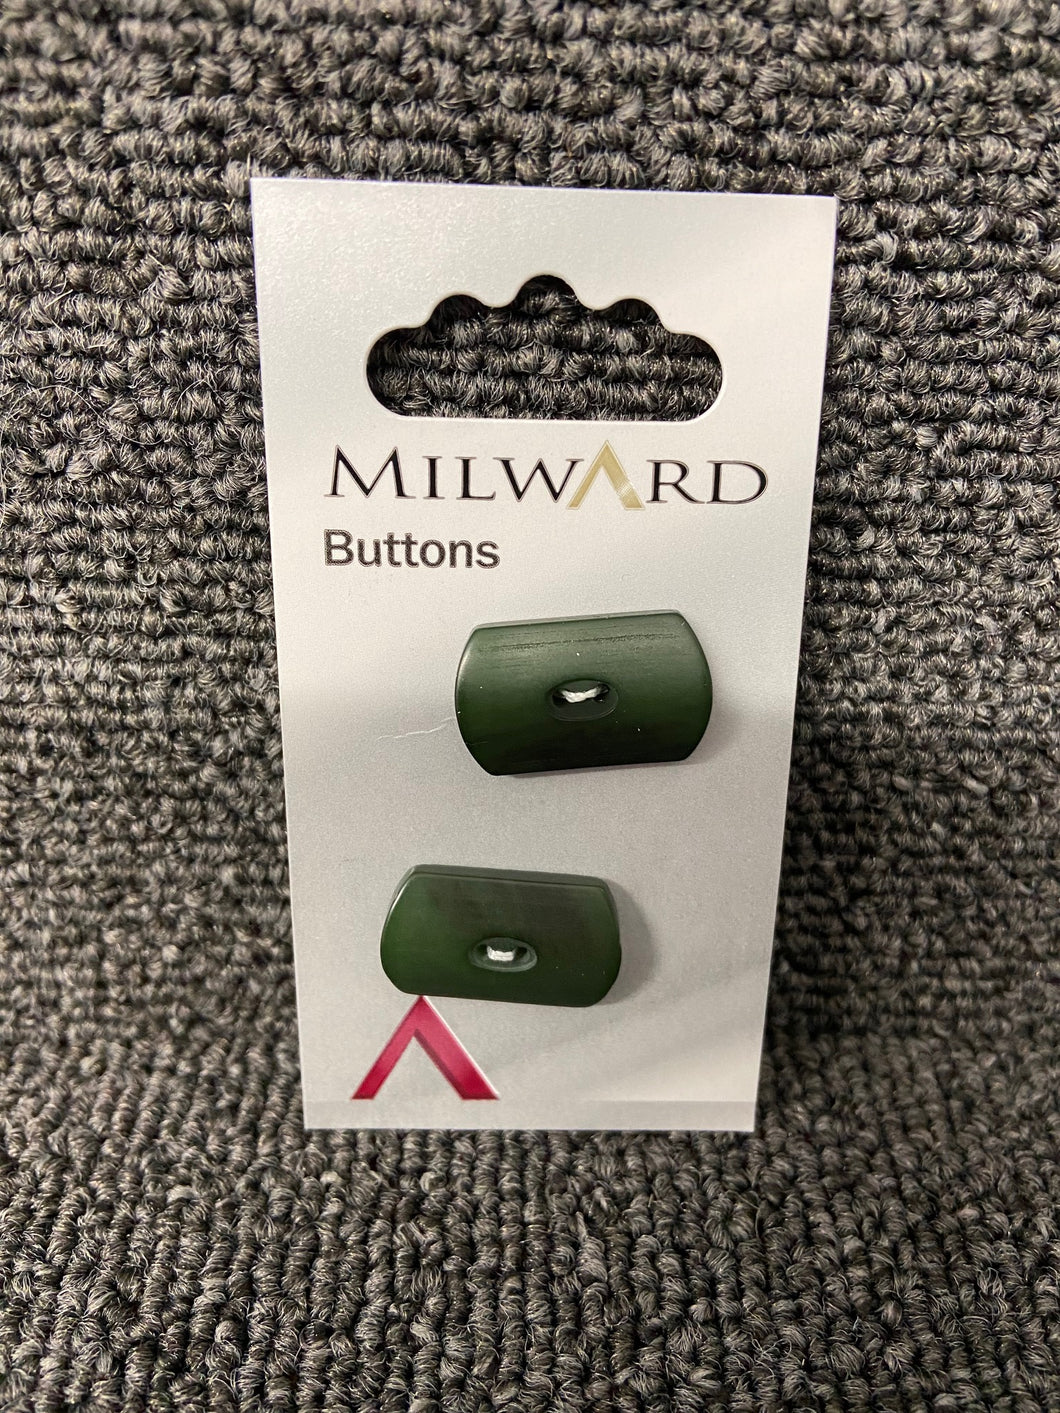 milward button buttons green rectangle Two Hole 23mm Pack of 2 Code C 01316